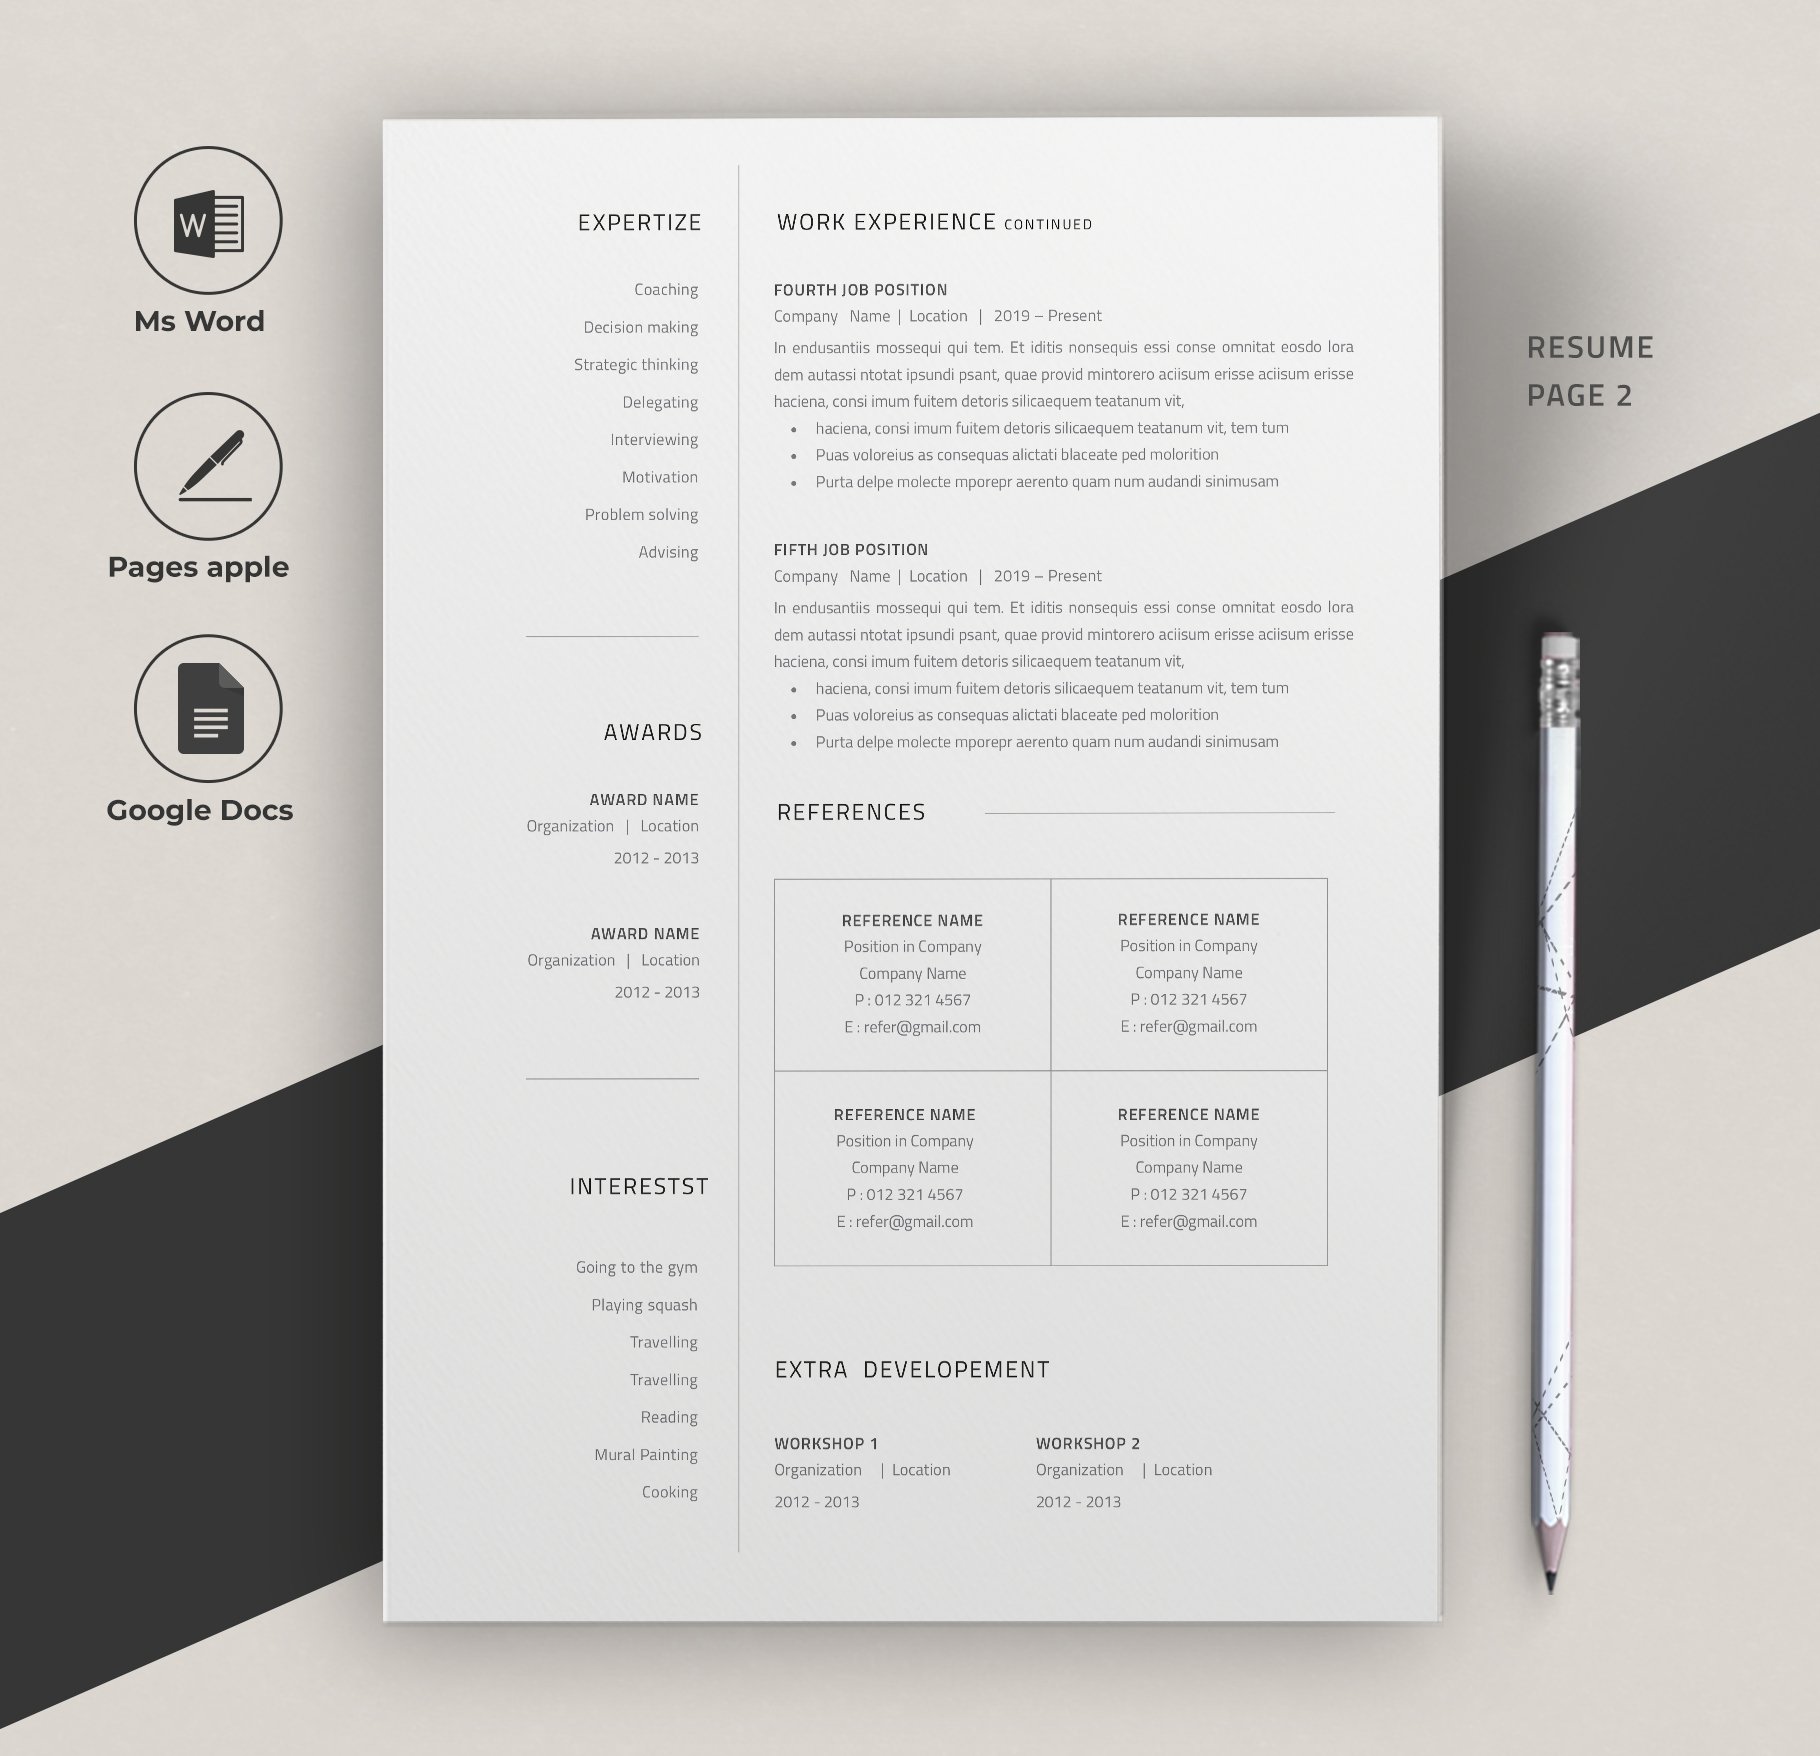 Clean and modern resume template.